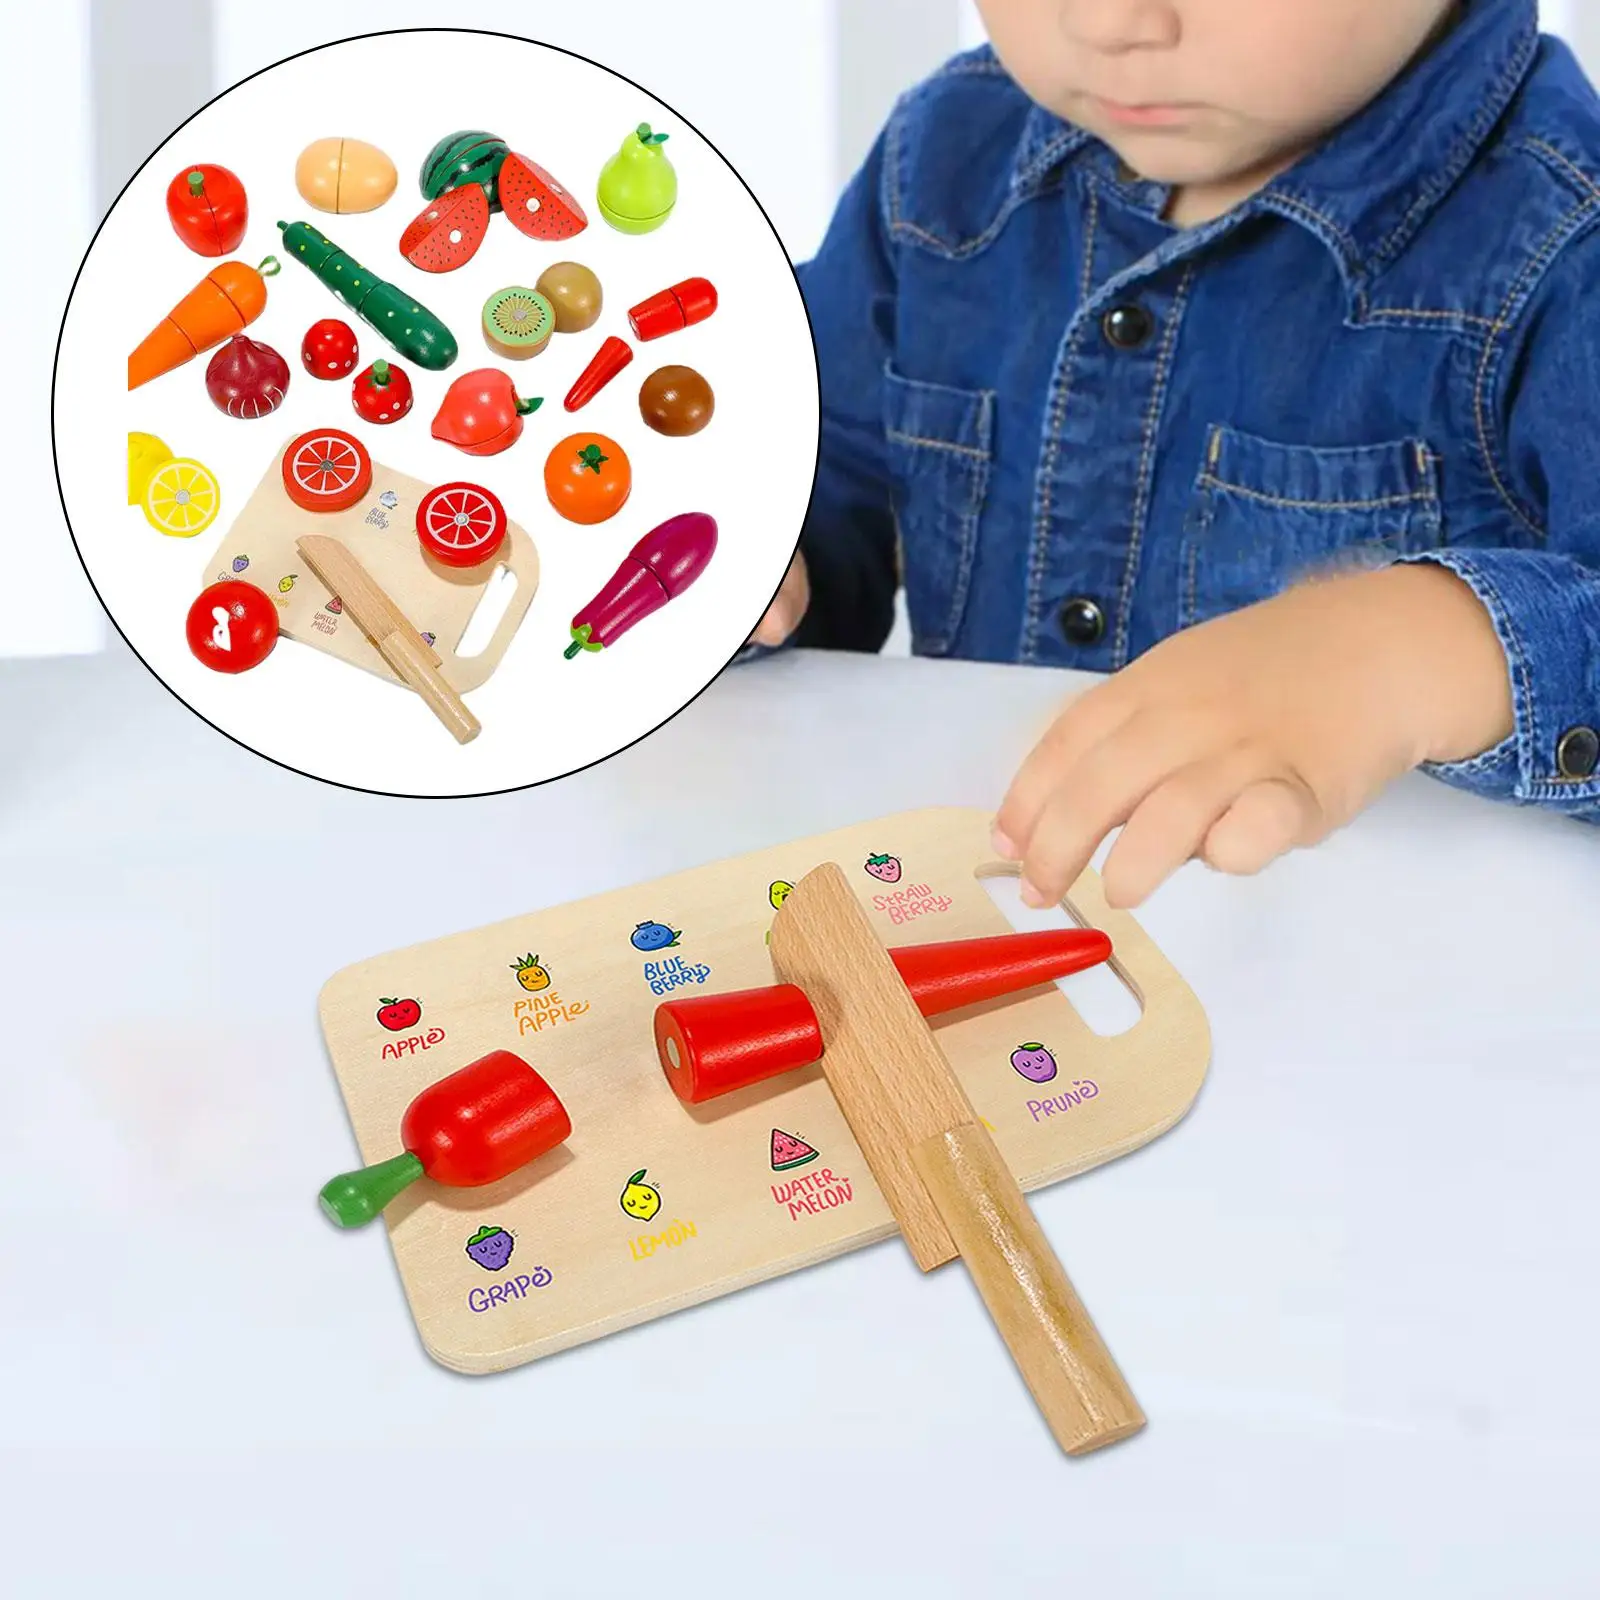 Toddler Cutting Food Fruit Set Pretend Play Toy Early Development Colorful for 3, 4, 5, 6 Year Old Durable Easily Store Gift